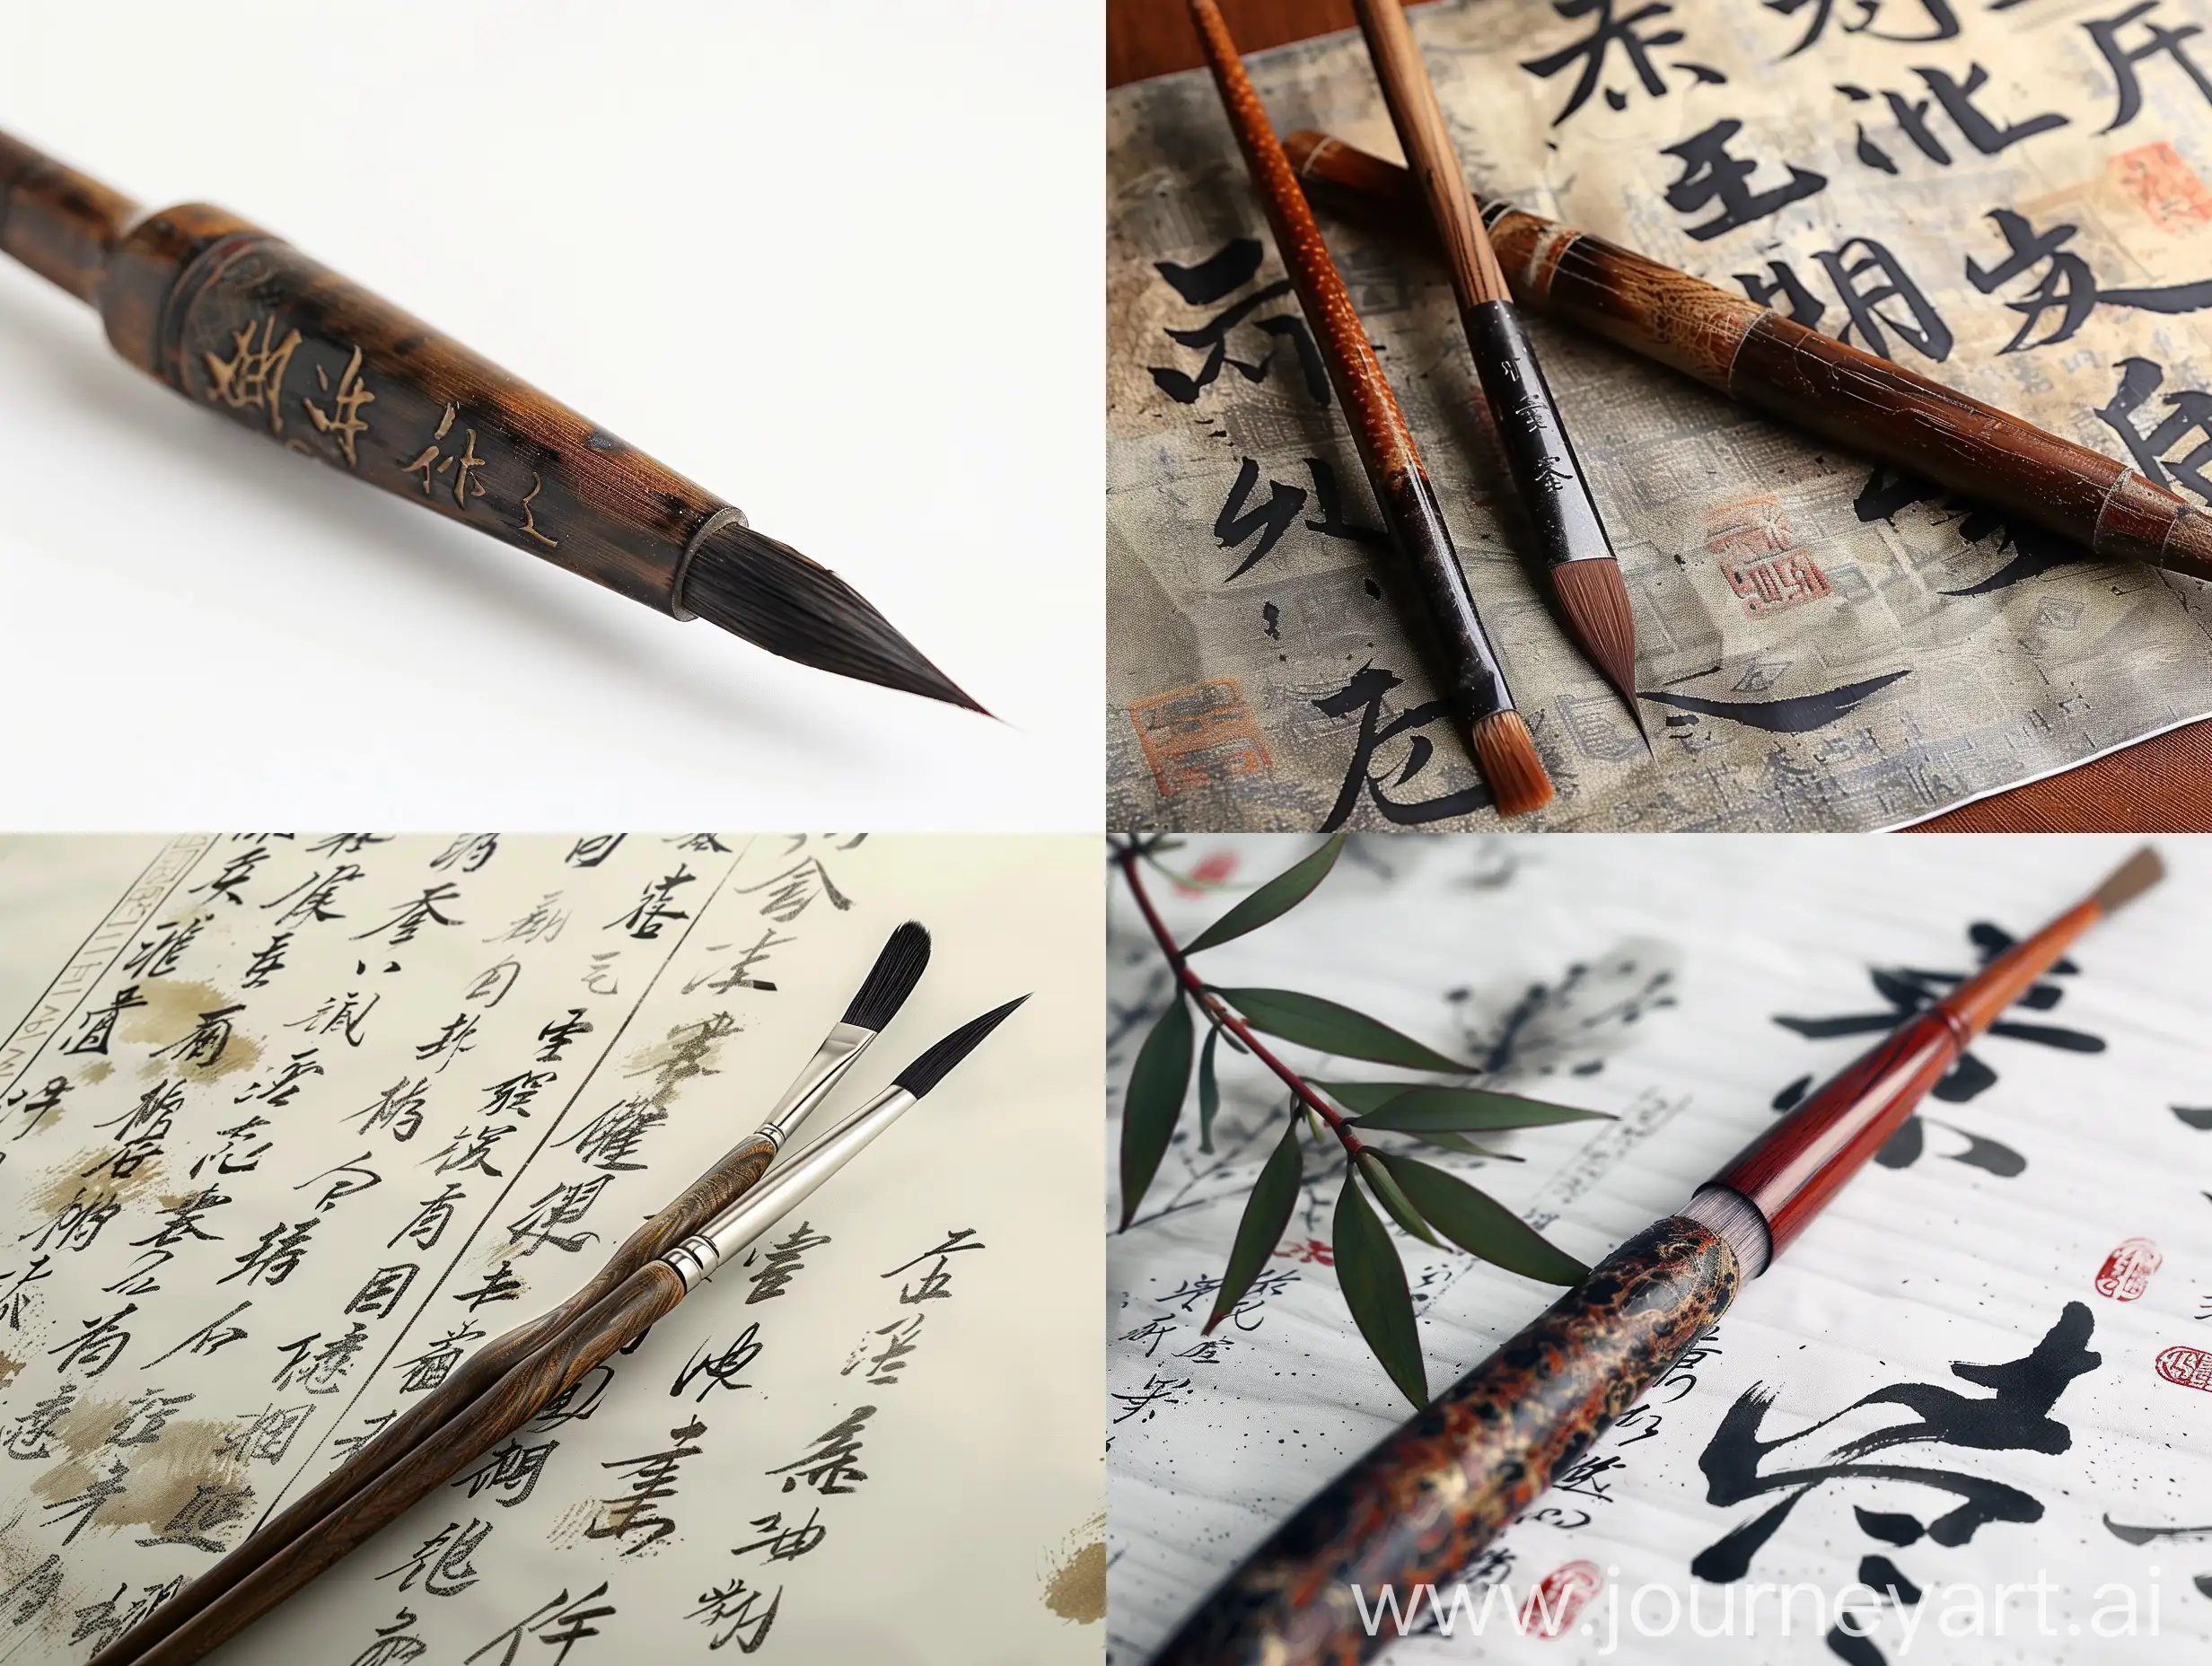 Traditional-Chinese-Calligraphy-Delicate-Brush-Strokes-Depicting-Ancient-Culture